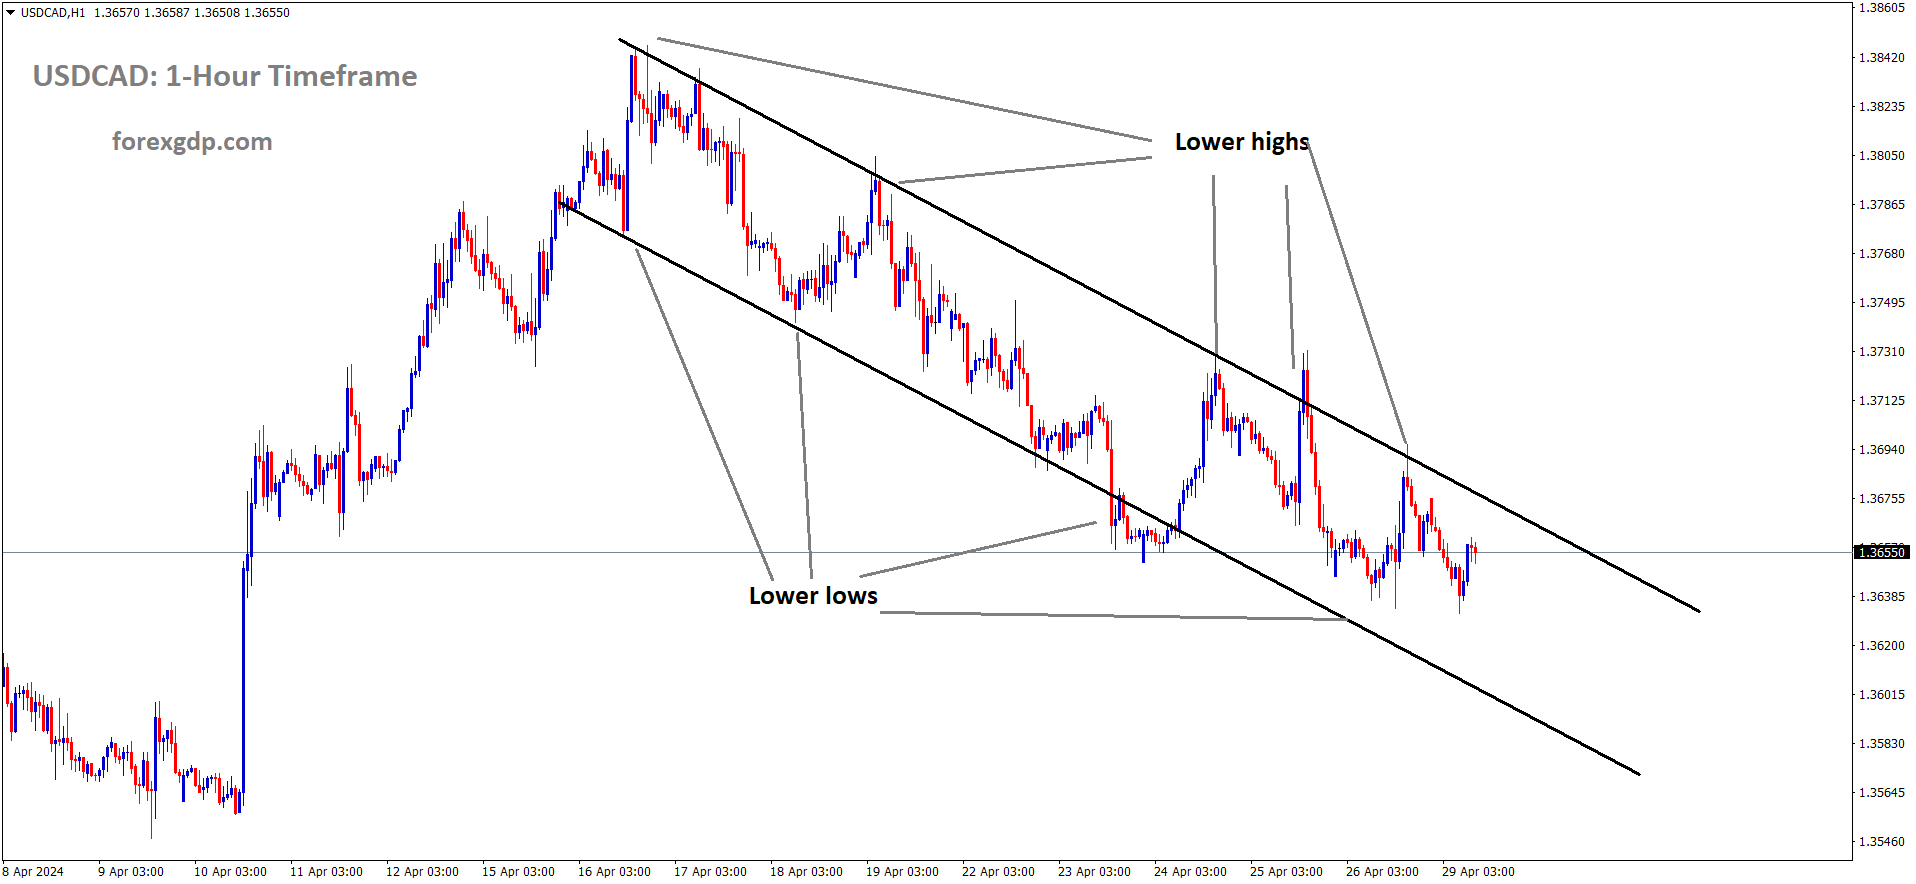 USDCAD is moving in Descending channel and the market has fallen from the lower high area of the channel